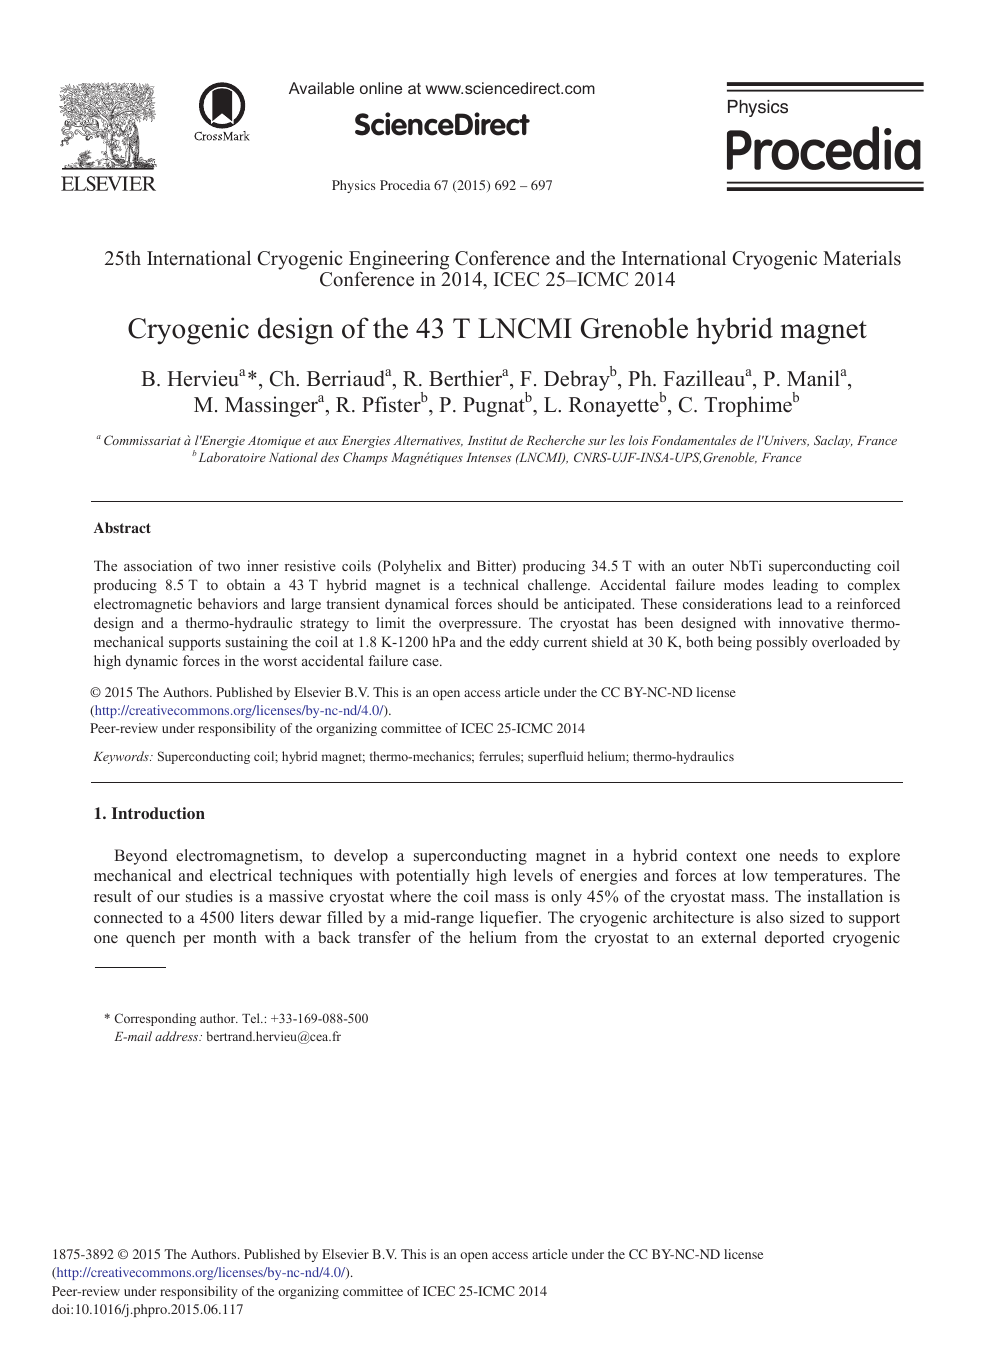 Cryogenic Design Of The 43 T Lncmi Grenoble Hybrid Magnet Topic Of Research Paper In Electrical Engineering Electronic Engineering Information Engineering Download Scholarly Article Pdf And Read For Free On Cyberleninka